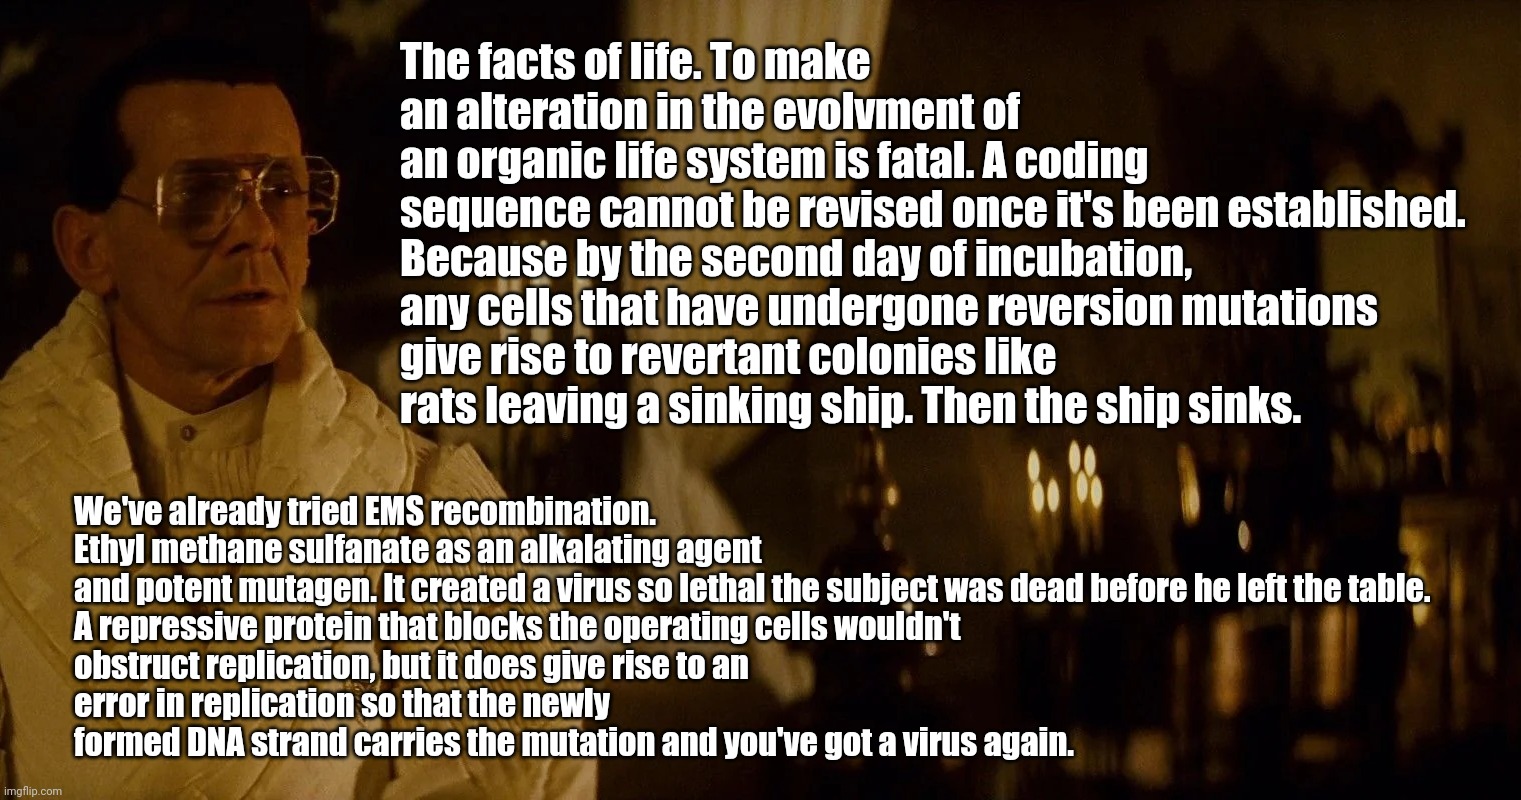 Antibody-dependent enhancement (ADE) for mRNA vaccines predicted in 1982. | The facts of life. To make an alteration in the evolvment of
an organic life system is fatal. A coding sequence cannot be revised once it's been established.

Because by the second day of incubation,
any cells that have undergone reversion mutations give rise to revertant colonies like rats leaving a sinking ship. Then the ship sinks. We've already tried EMS recombination. Ethyl methane sulfanate as an alkalating agent and potent mutagen. It created a virus so lethal the subject was dead before he left the table.

A repressive protein that blocks the operating cells wouldn't
obstruct replication, but it does give rise to an
error in replication so that the newly formed DNA strand carries the mutation and you've got a virus again. | image tagged in vaxxine,covid | made w/ Imgflip meme maker